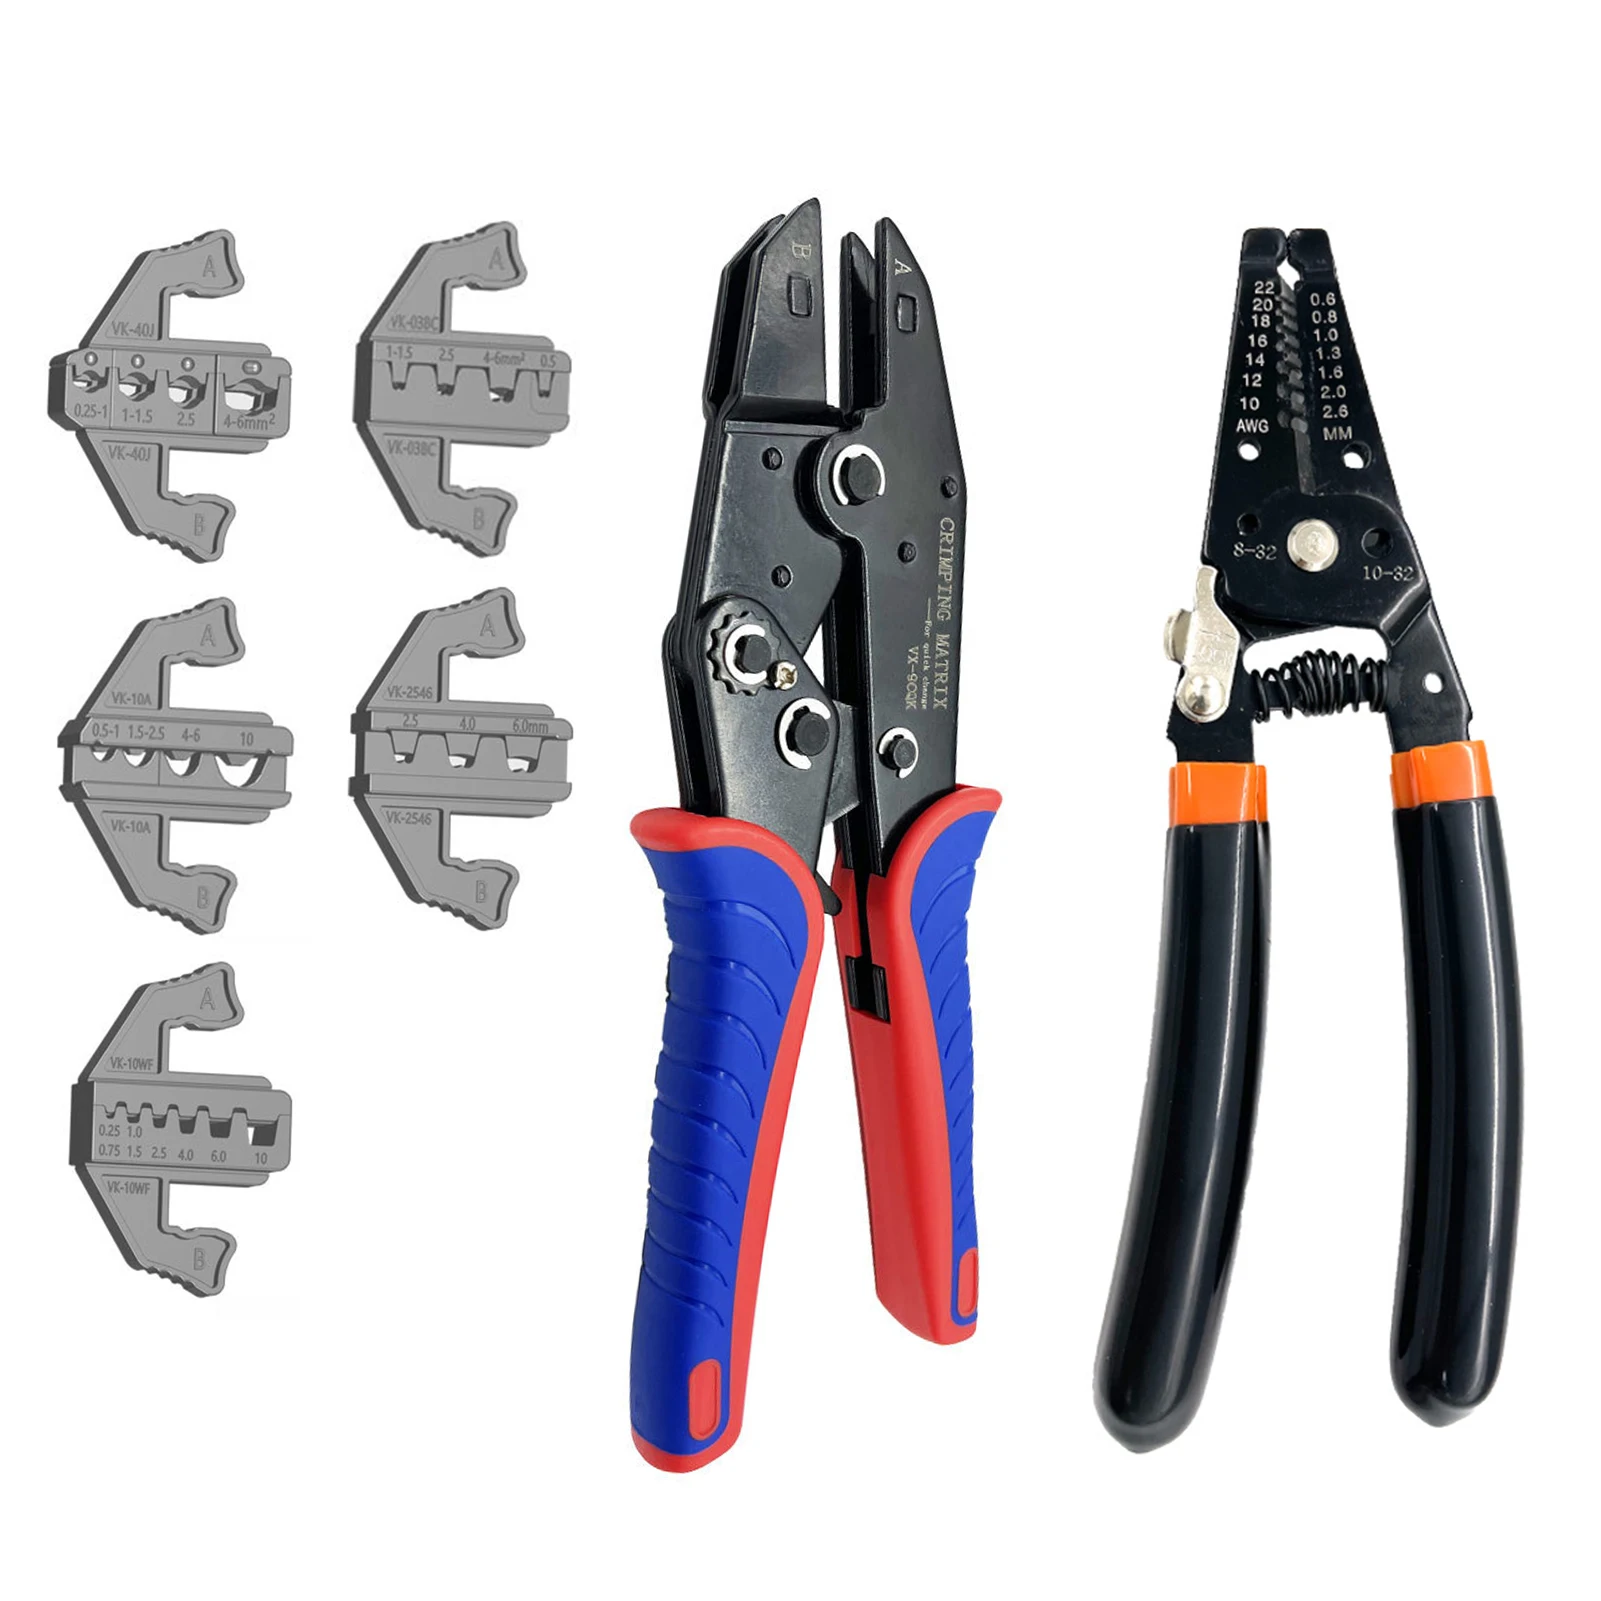 

Quick Change Crimping Tool Kit with Box Multifunction Ratcheting Wire Stripper Cable Terminal Crimper Pliers for Ferrule/ Nylon